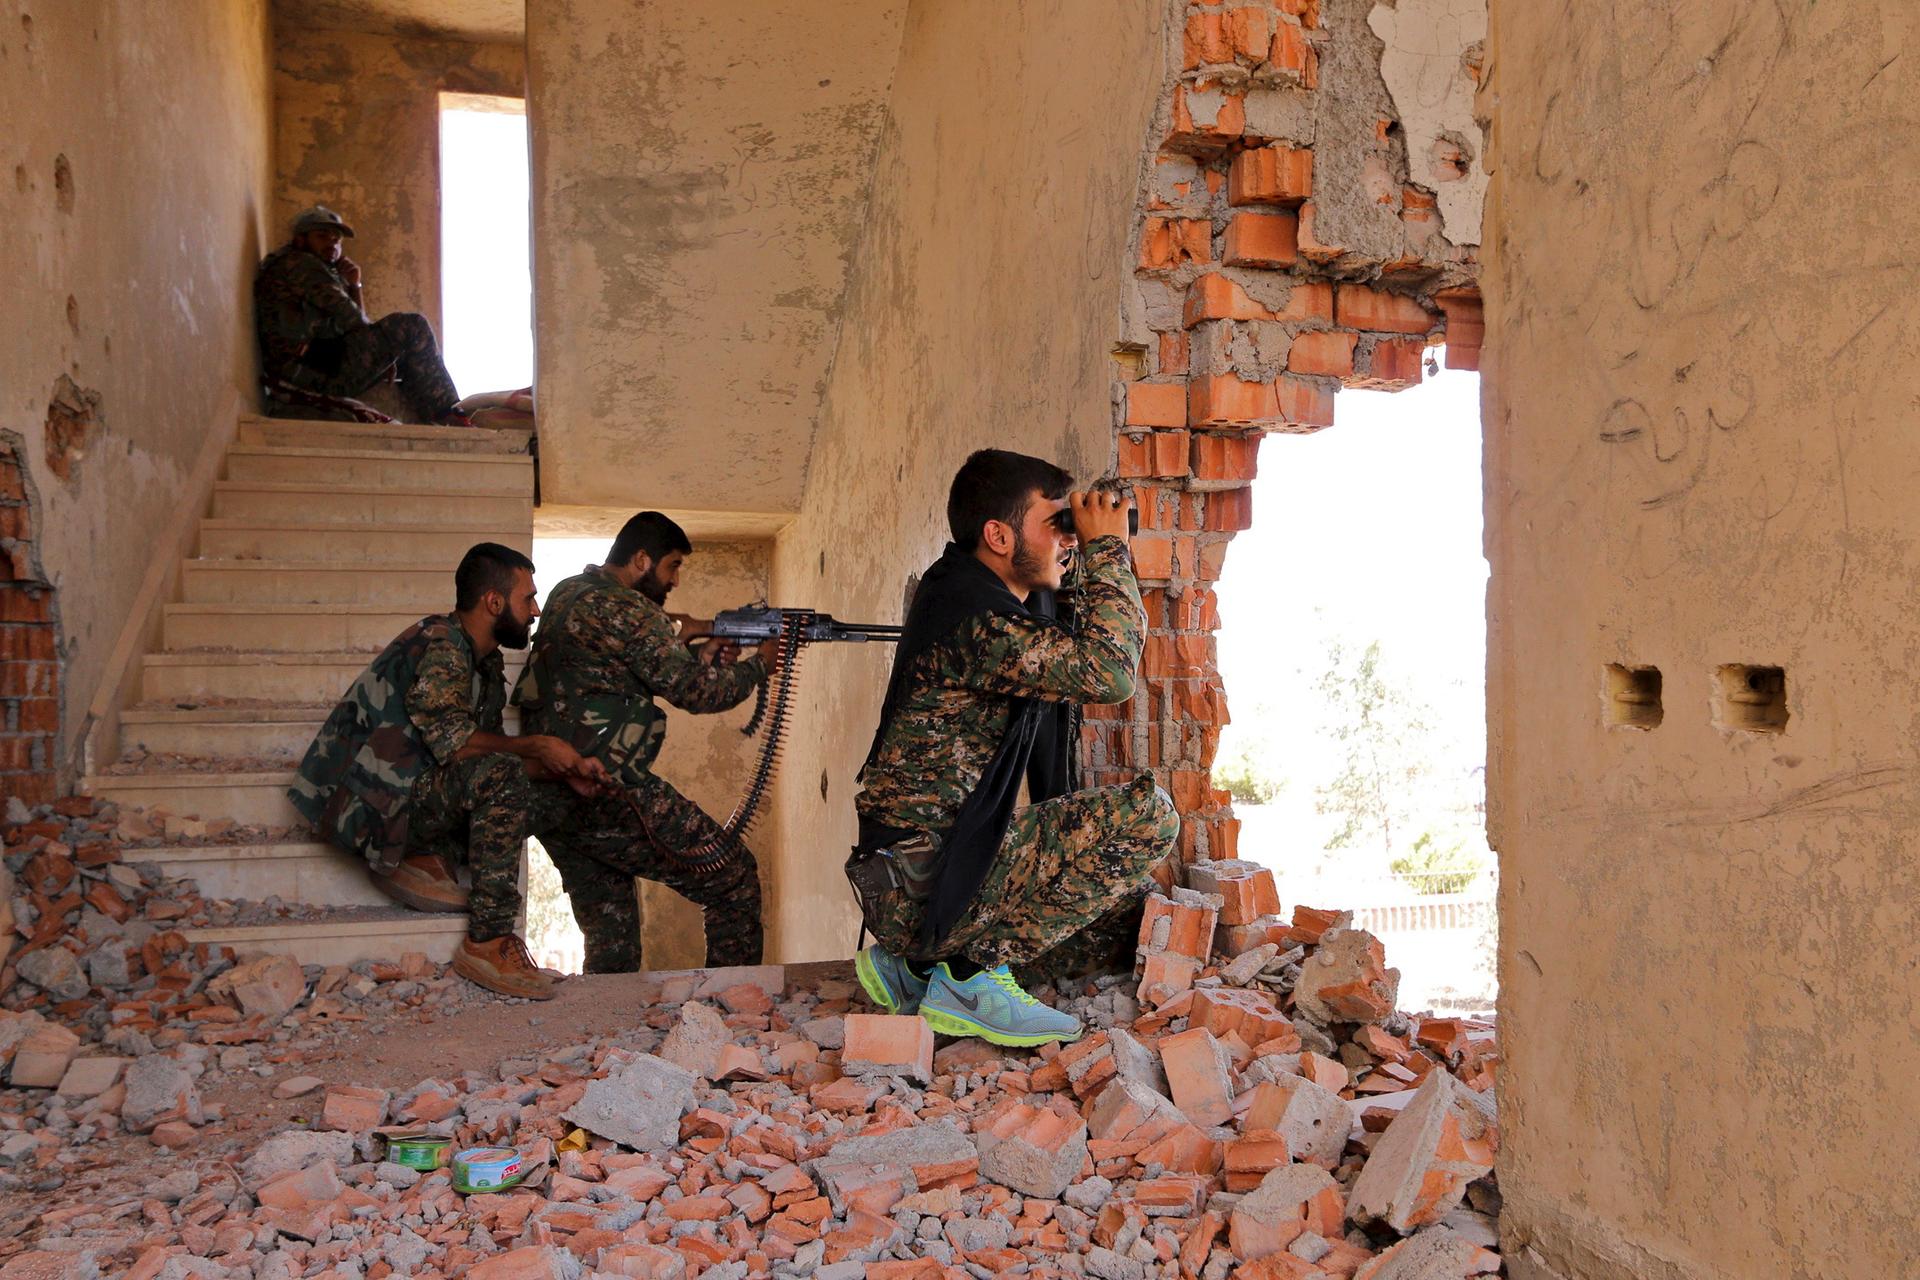 Despite the media spotlight on the refugees, the civil war rages on inside Syria. Here Kurdish fighters take on ISIS.